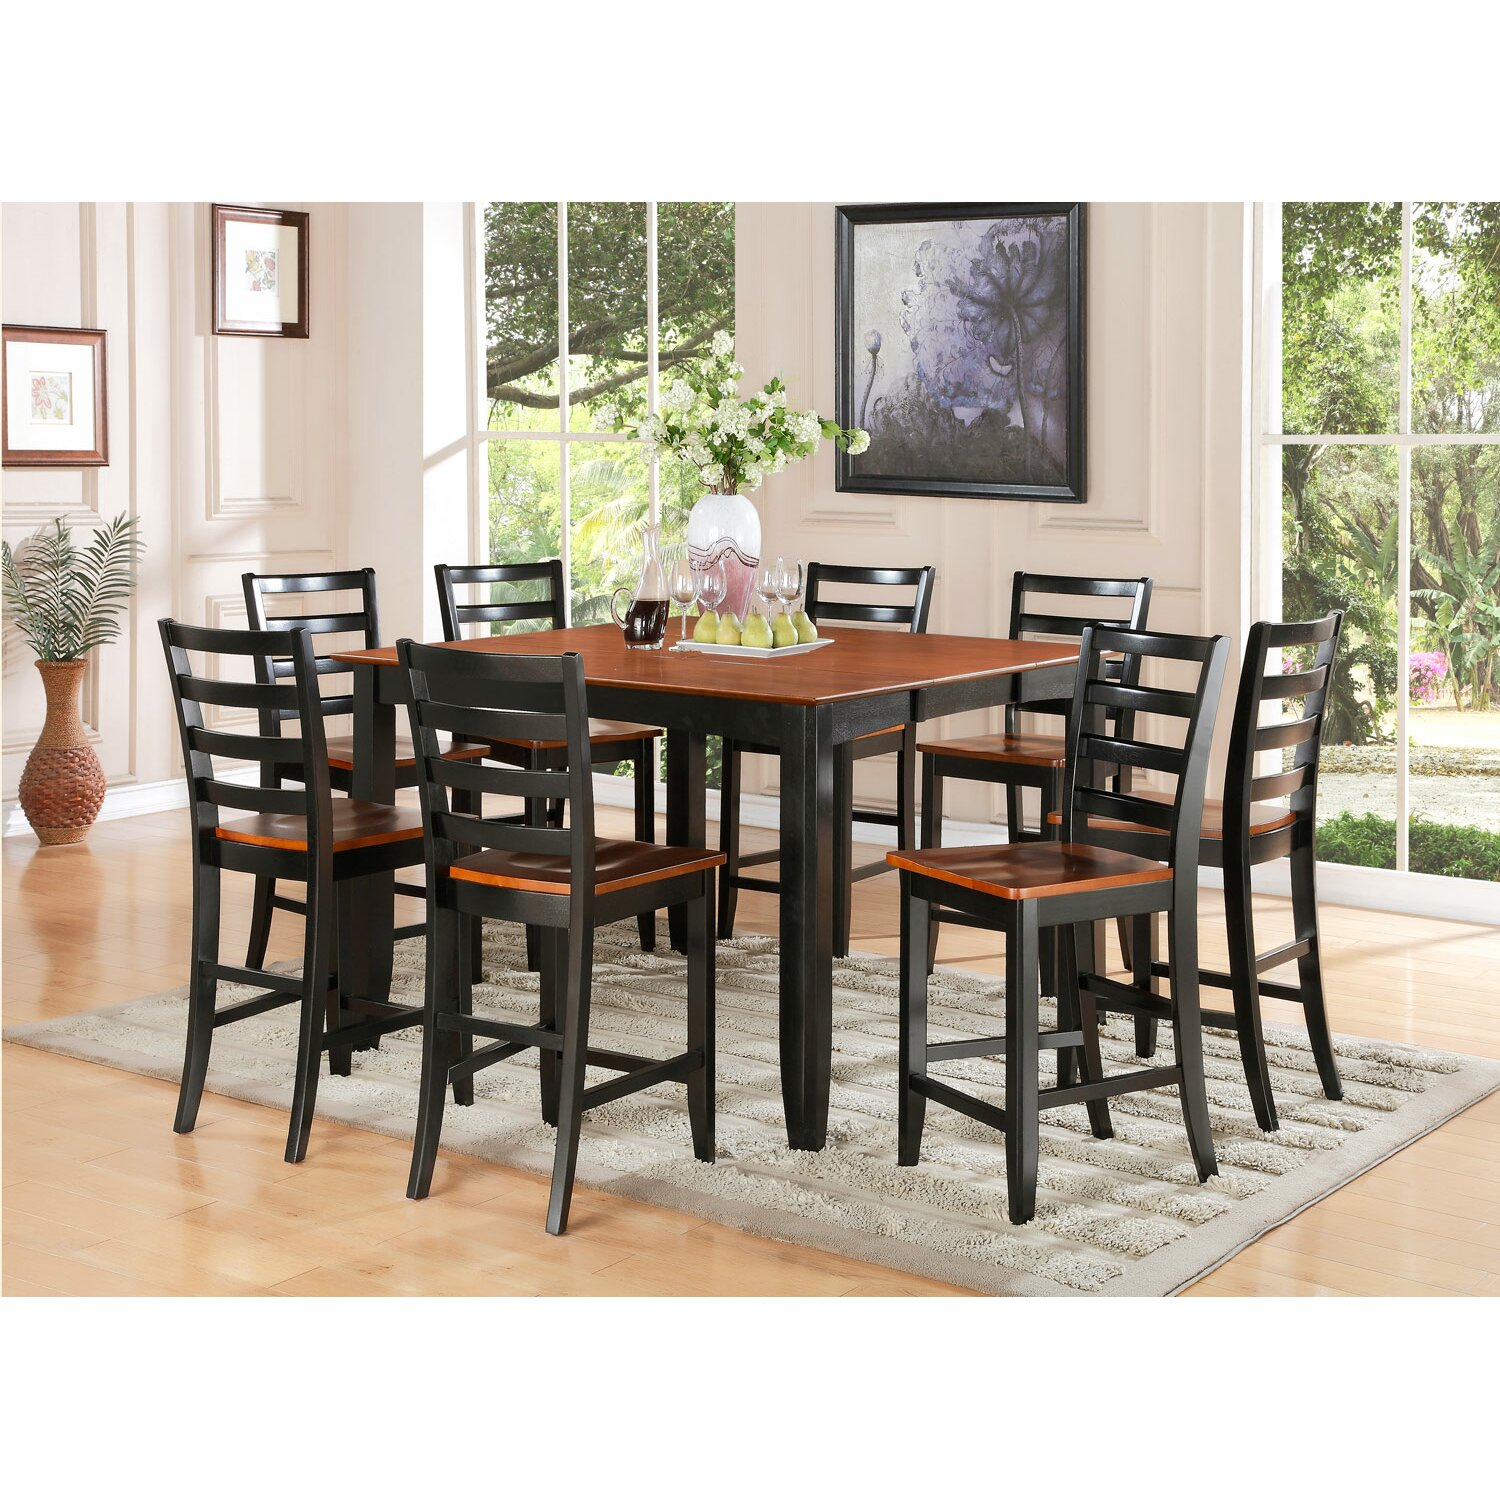 Wooden Importers Parfait 7 Piece Counter Height Dining Set & Reviews ...